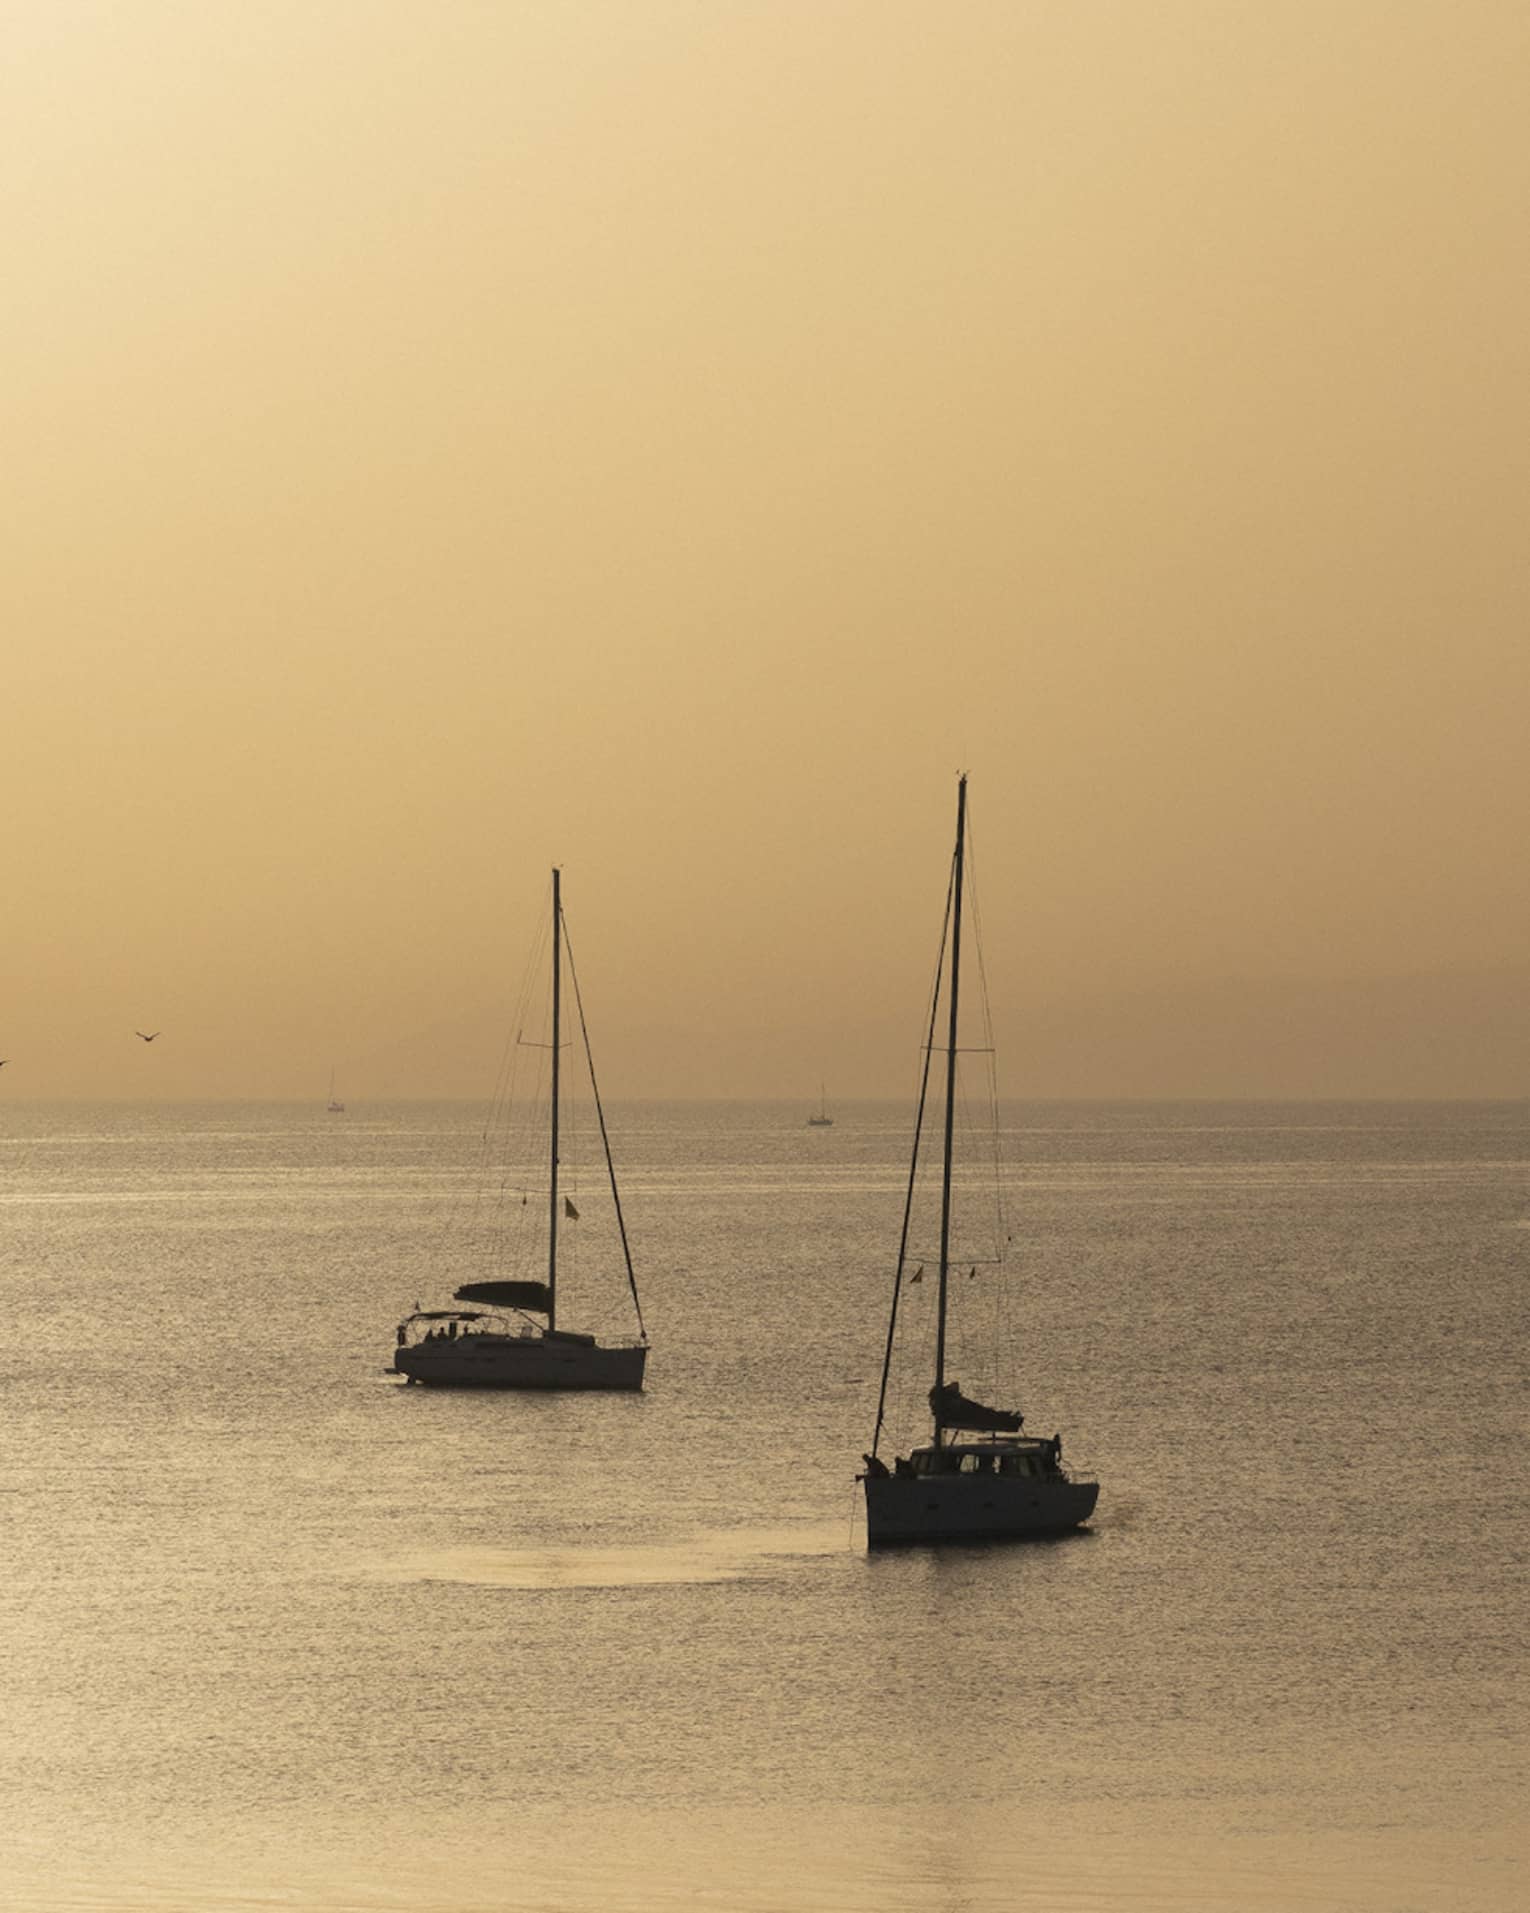 Silhouette of two sailboats at dusk on ocean cruising Greek isles. 